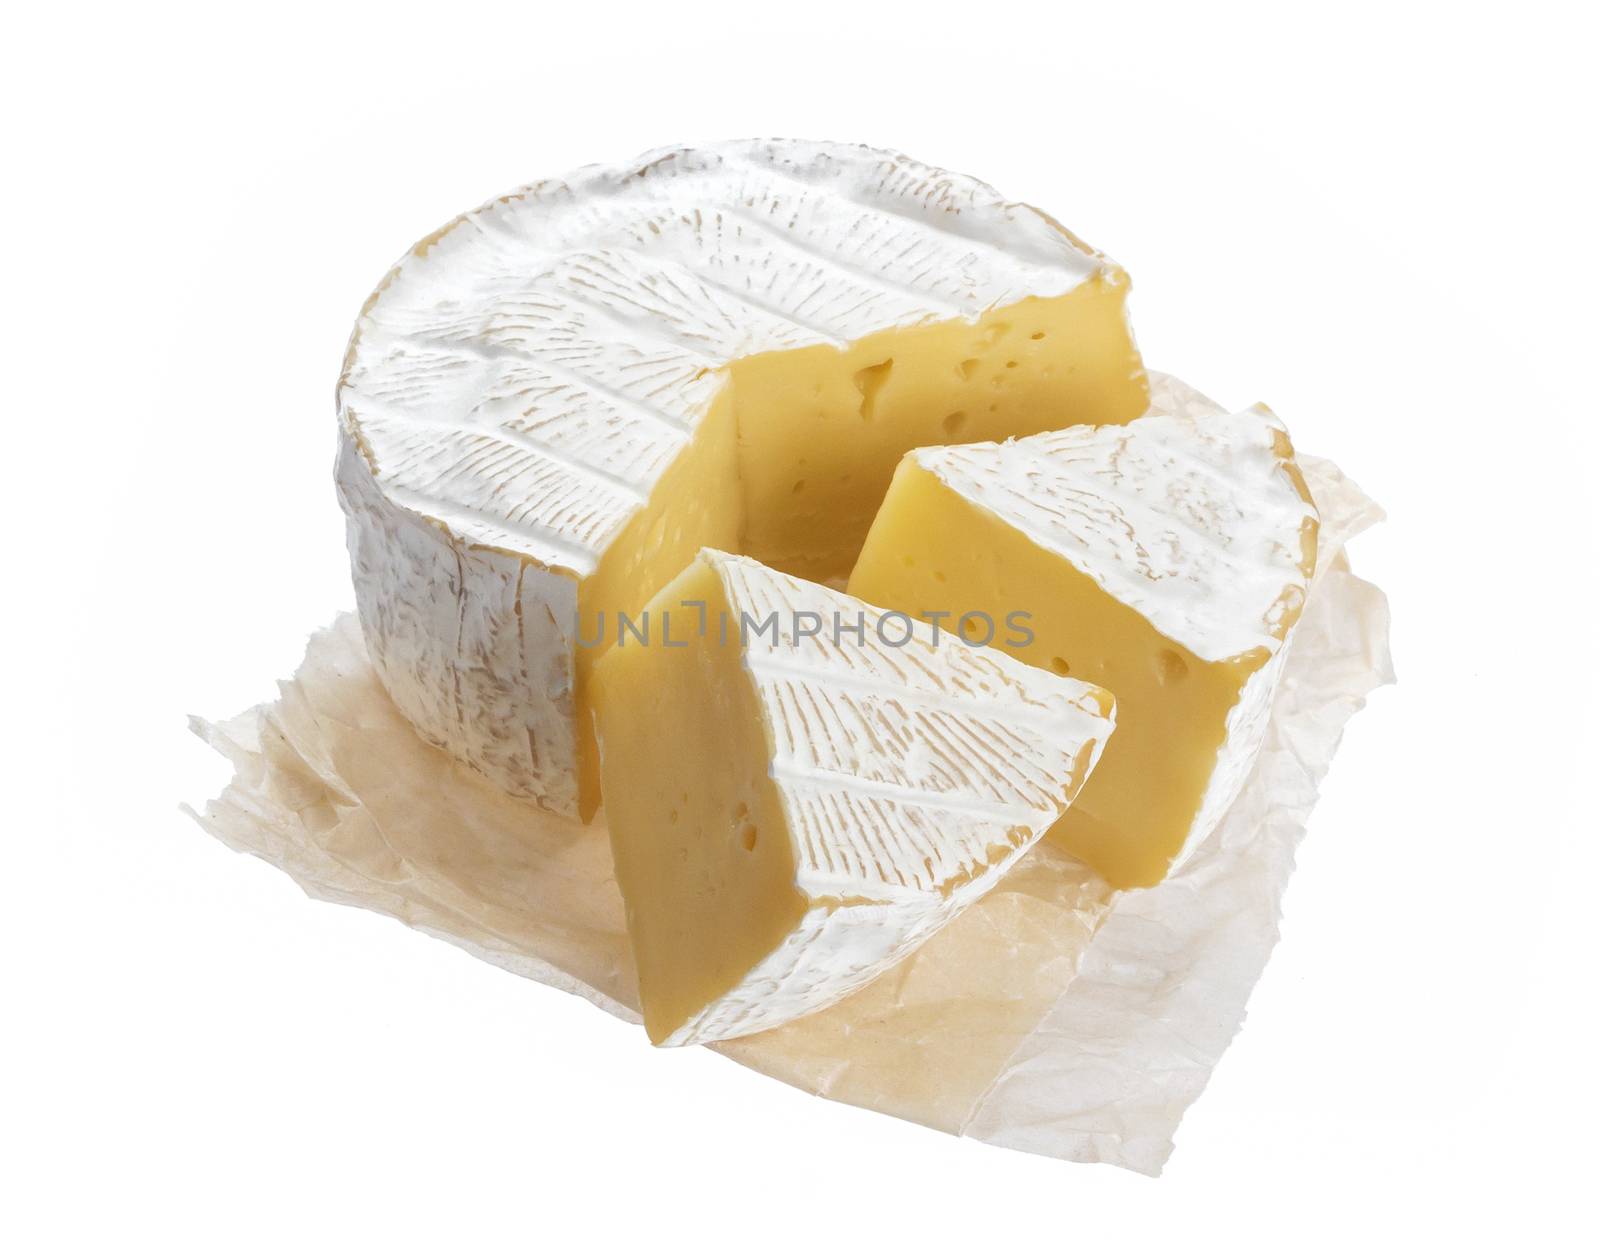 Camembert or brie cheese isolated on white background with clipping path